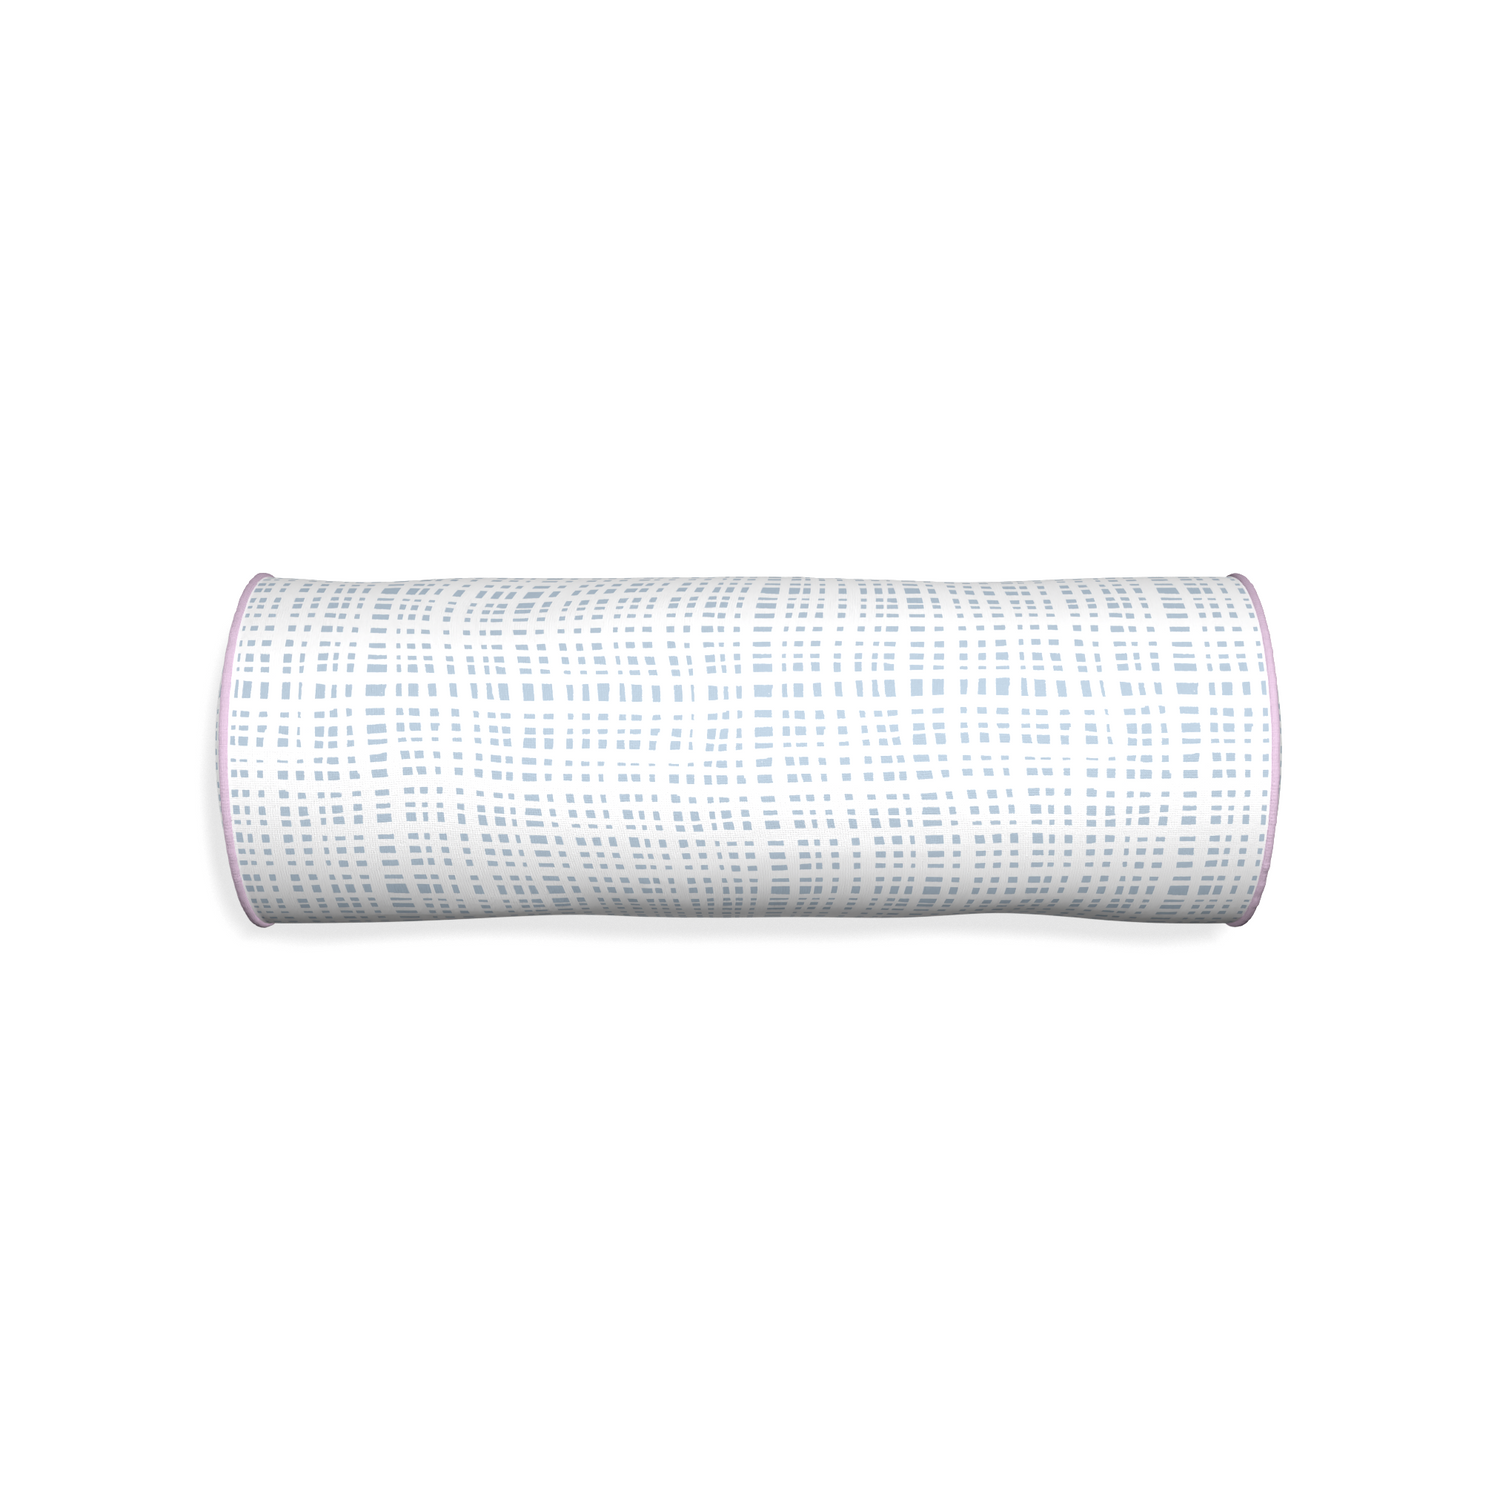 Bolster ginger sky custom plaid sky bluepillow with l piping on white background